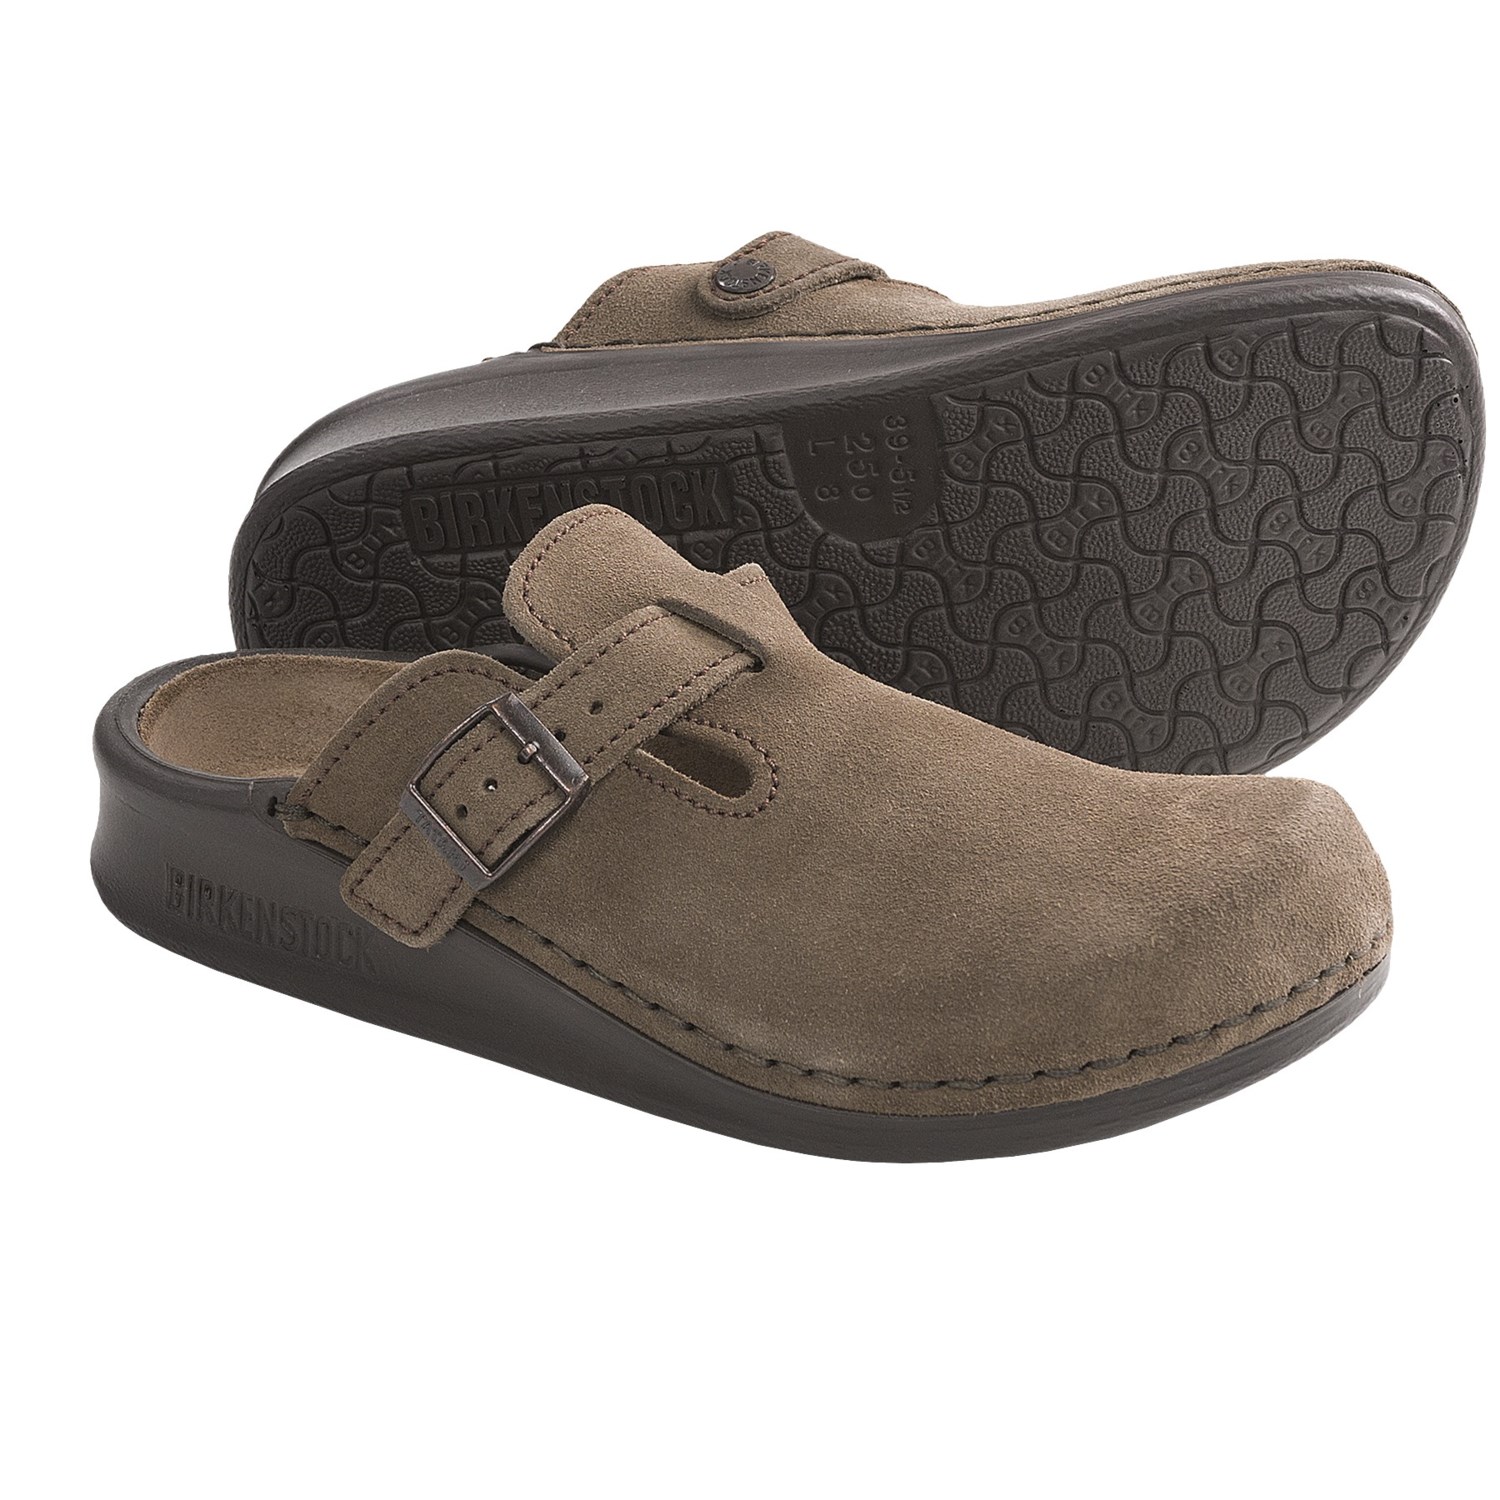 Tatami by Birkenstock Oklahoma Clogs - Suede, Slip-Ons (For Men and ...